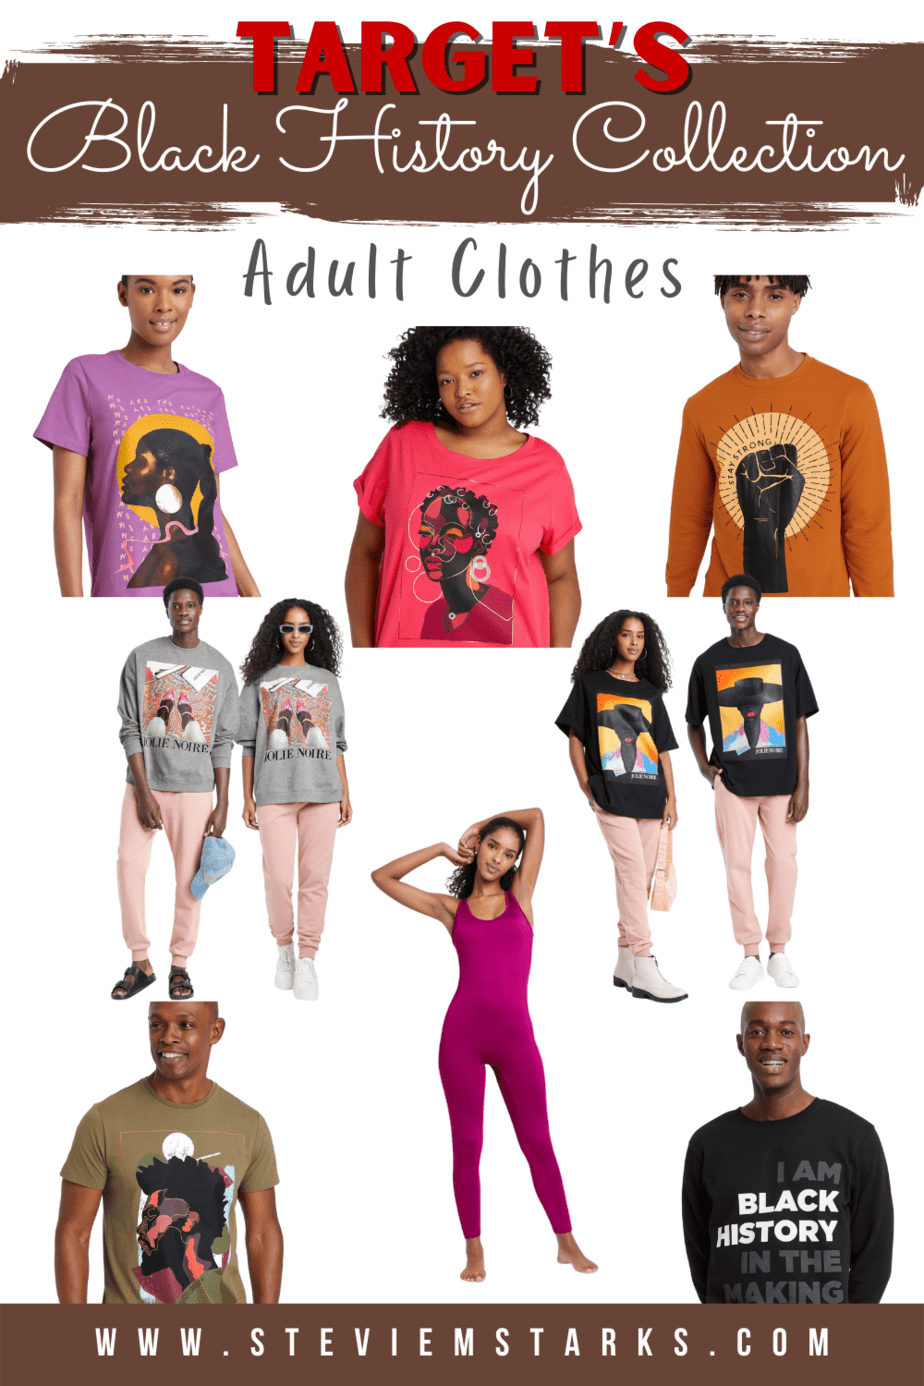 The New Target Black History Month Collection Is Out And Selling Quickly!